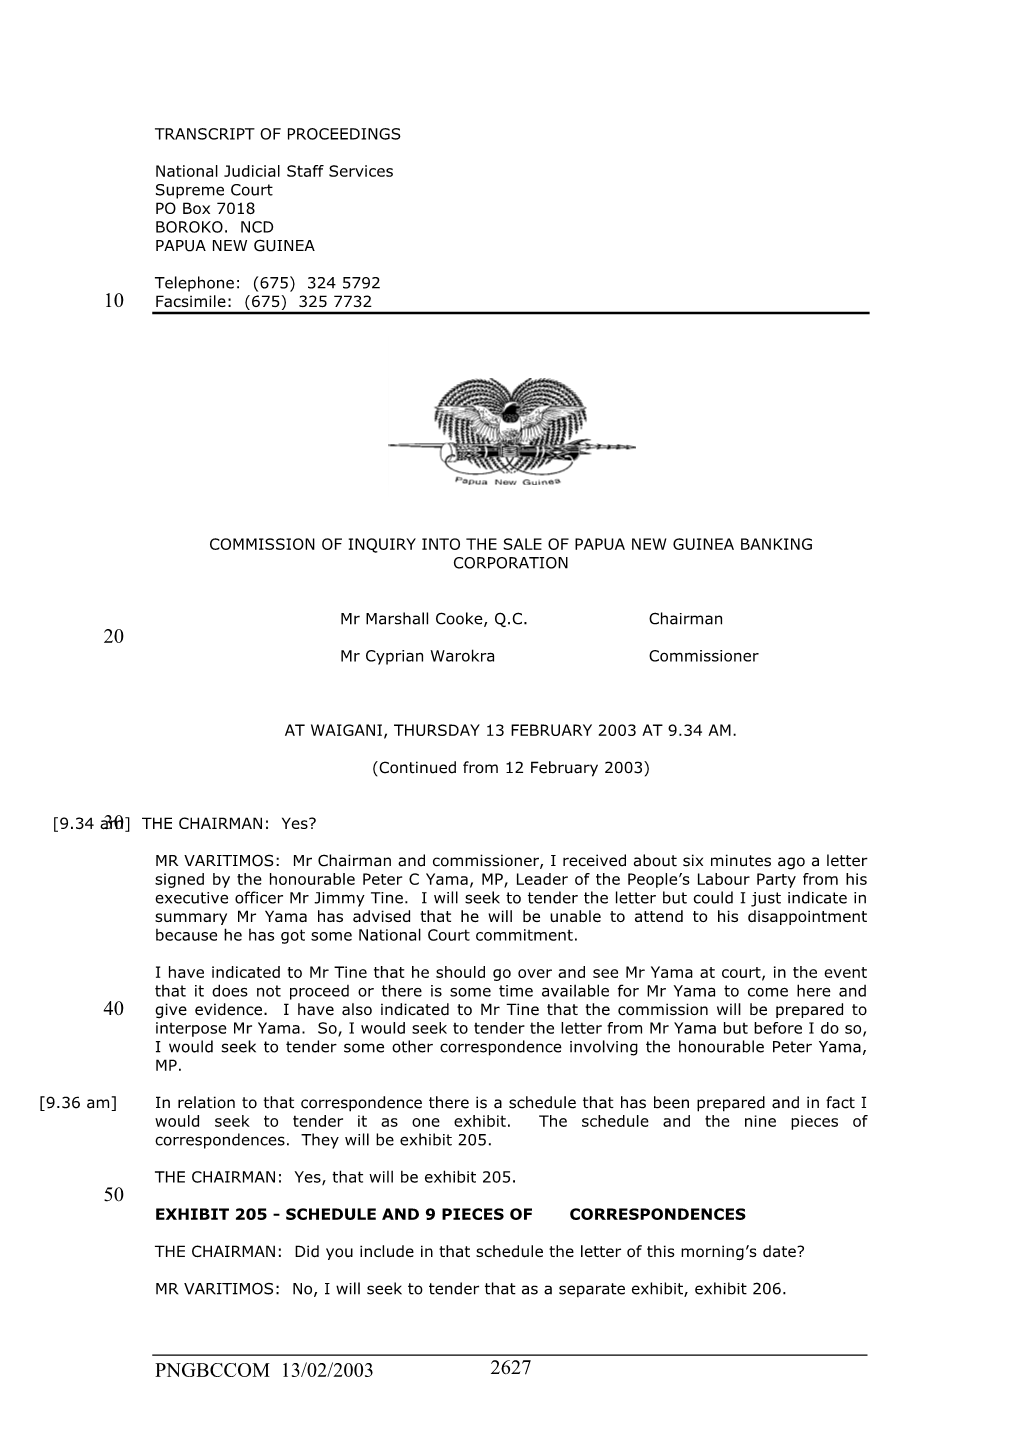 This Is the Cover Sheet for the Combined Transcript